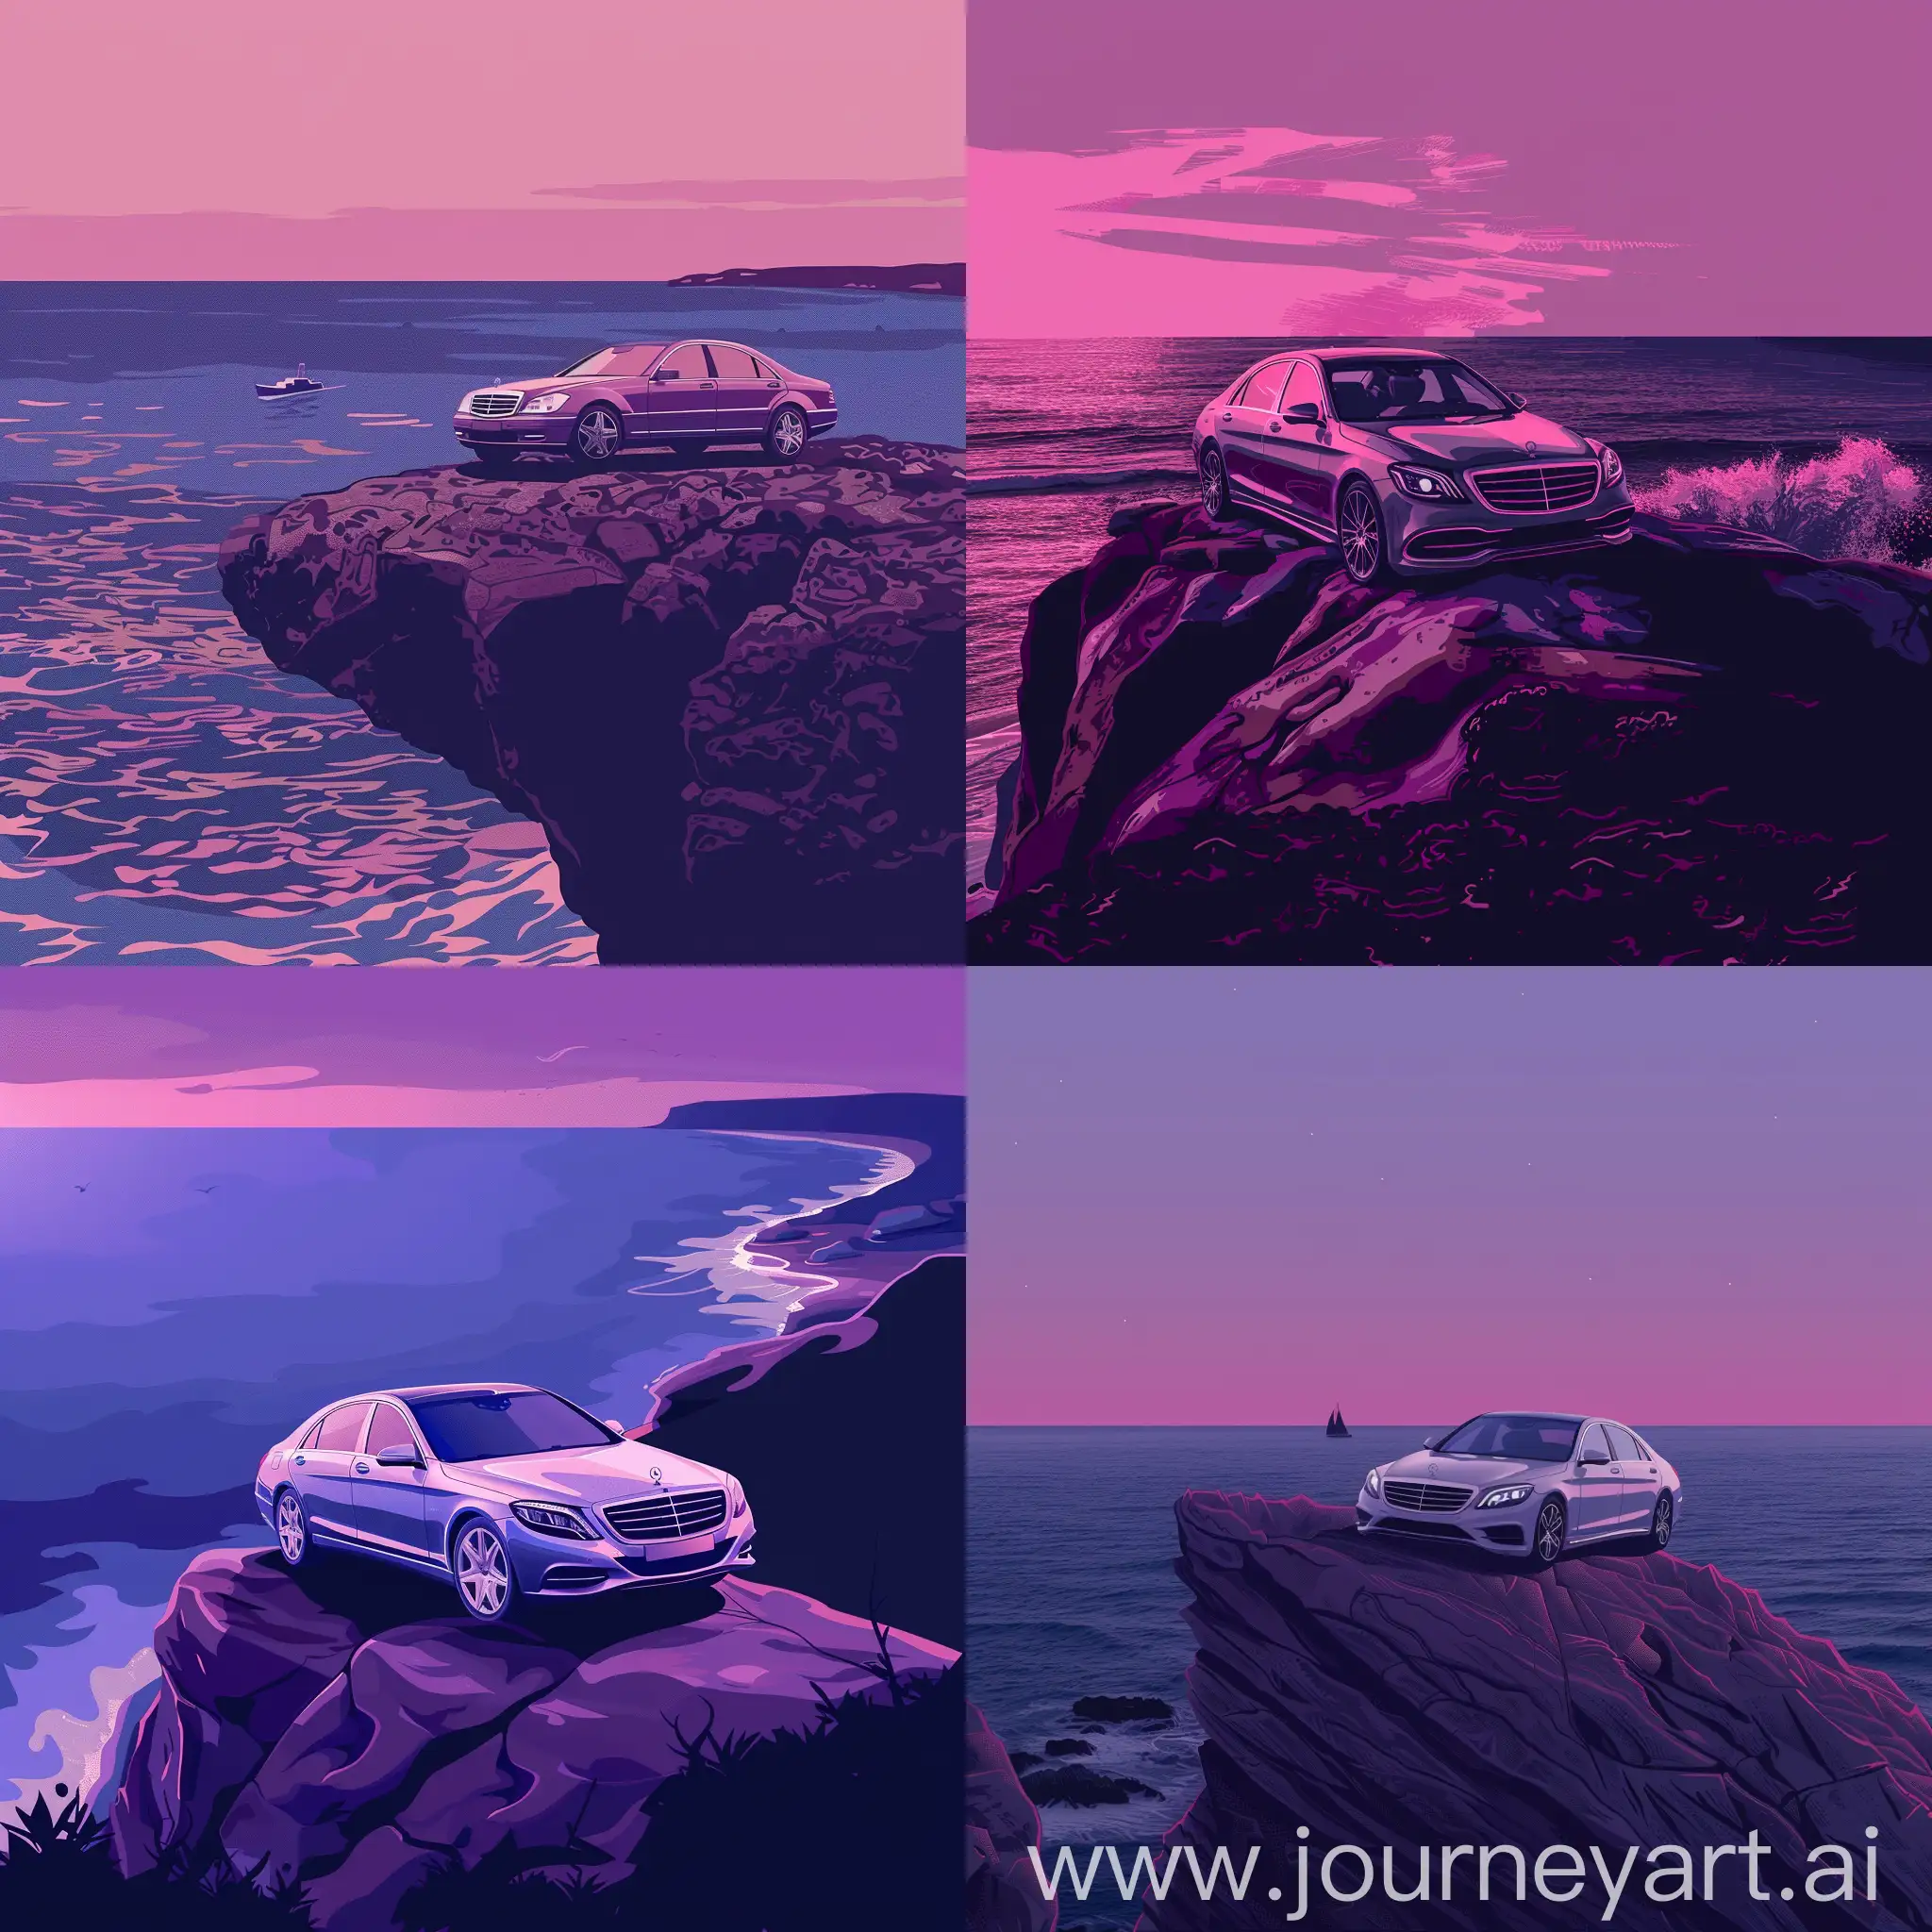 A vector art of a rock, ocean view, there is a Mercedes Benz S500 on the rock, it's evening, low purple theme